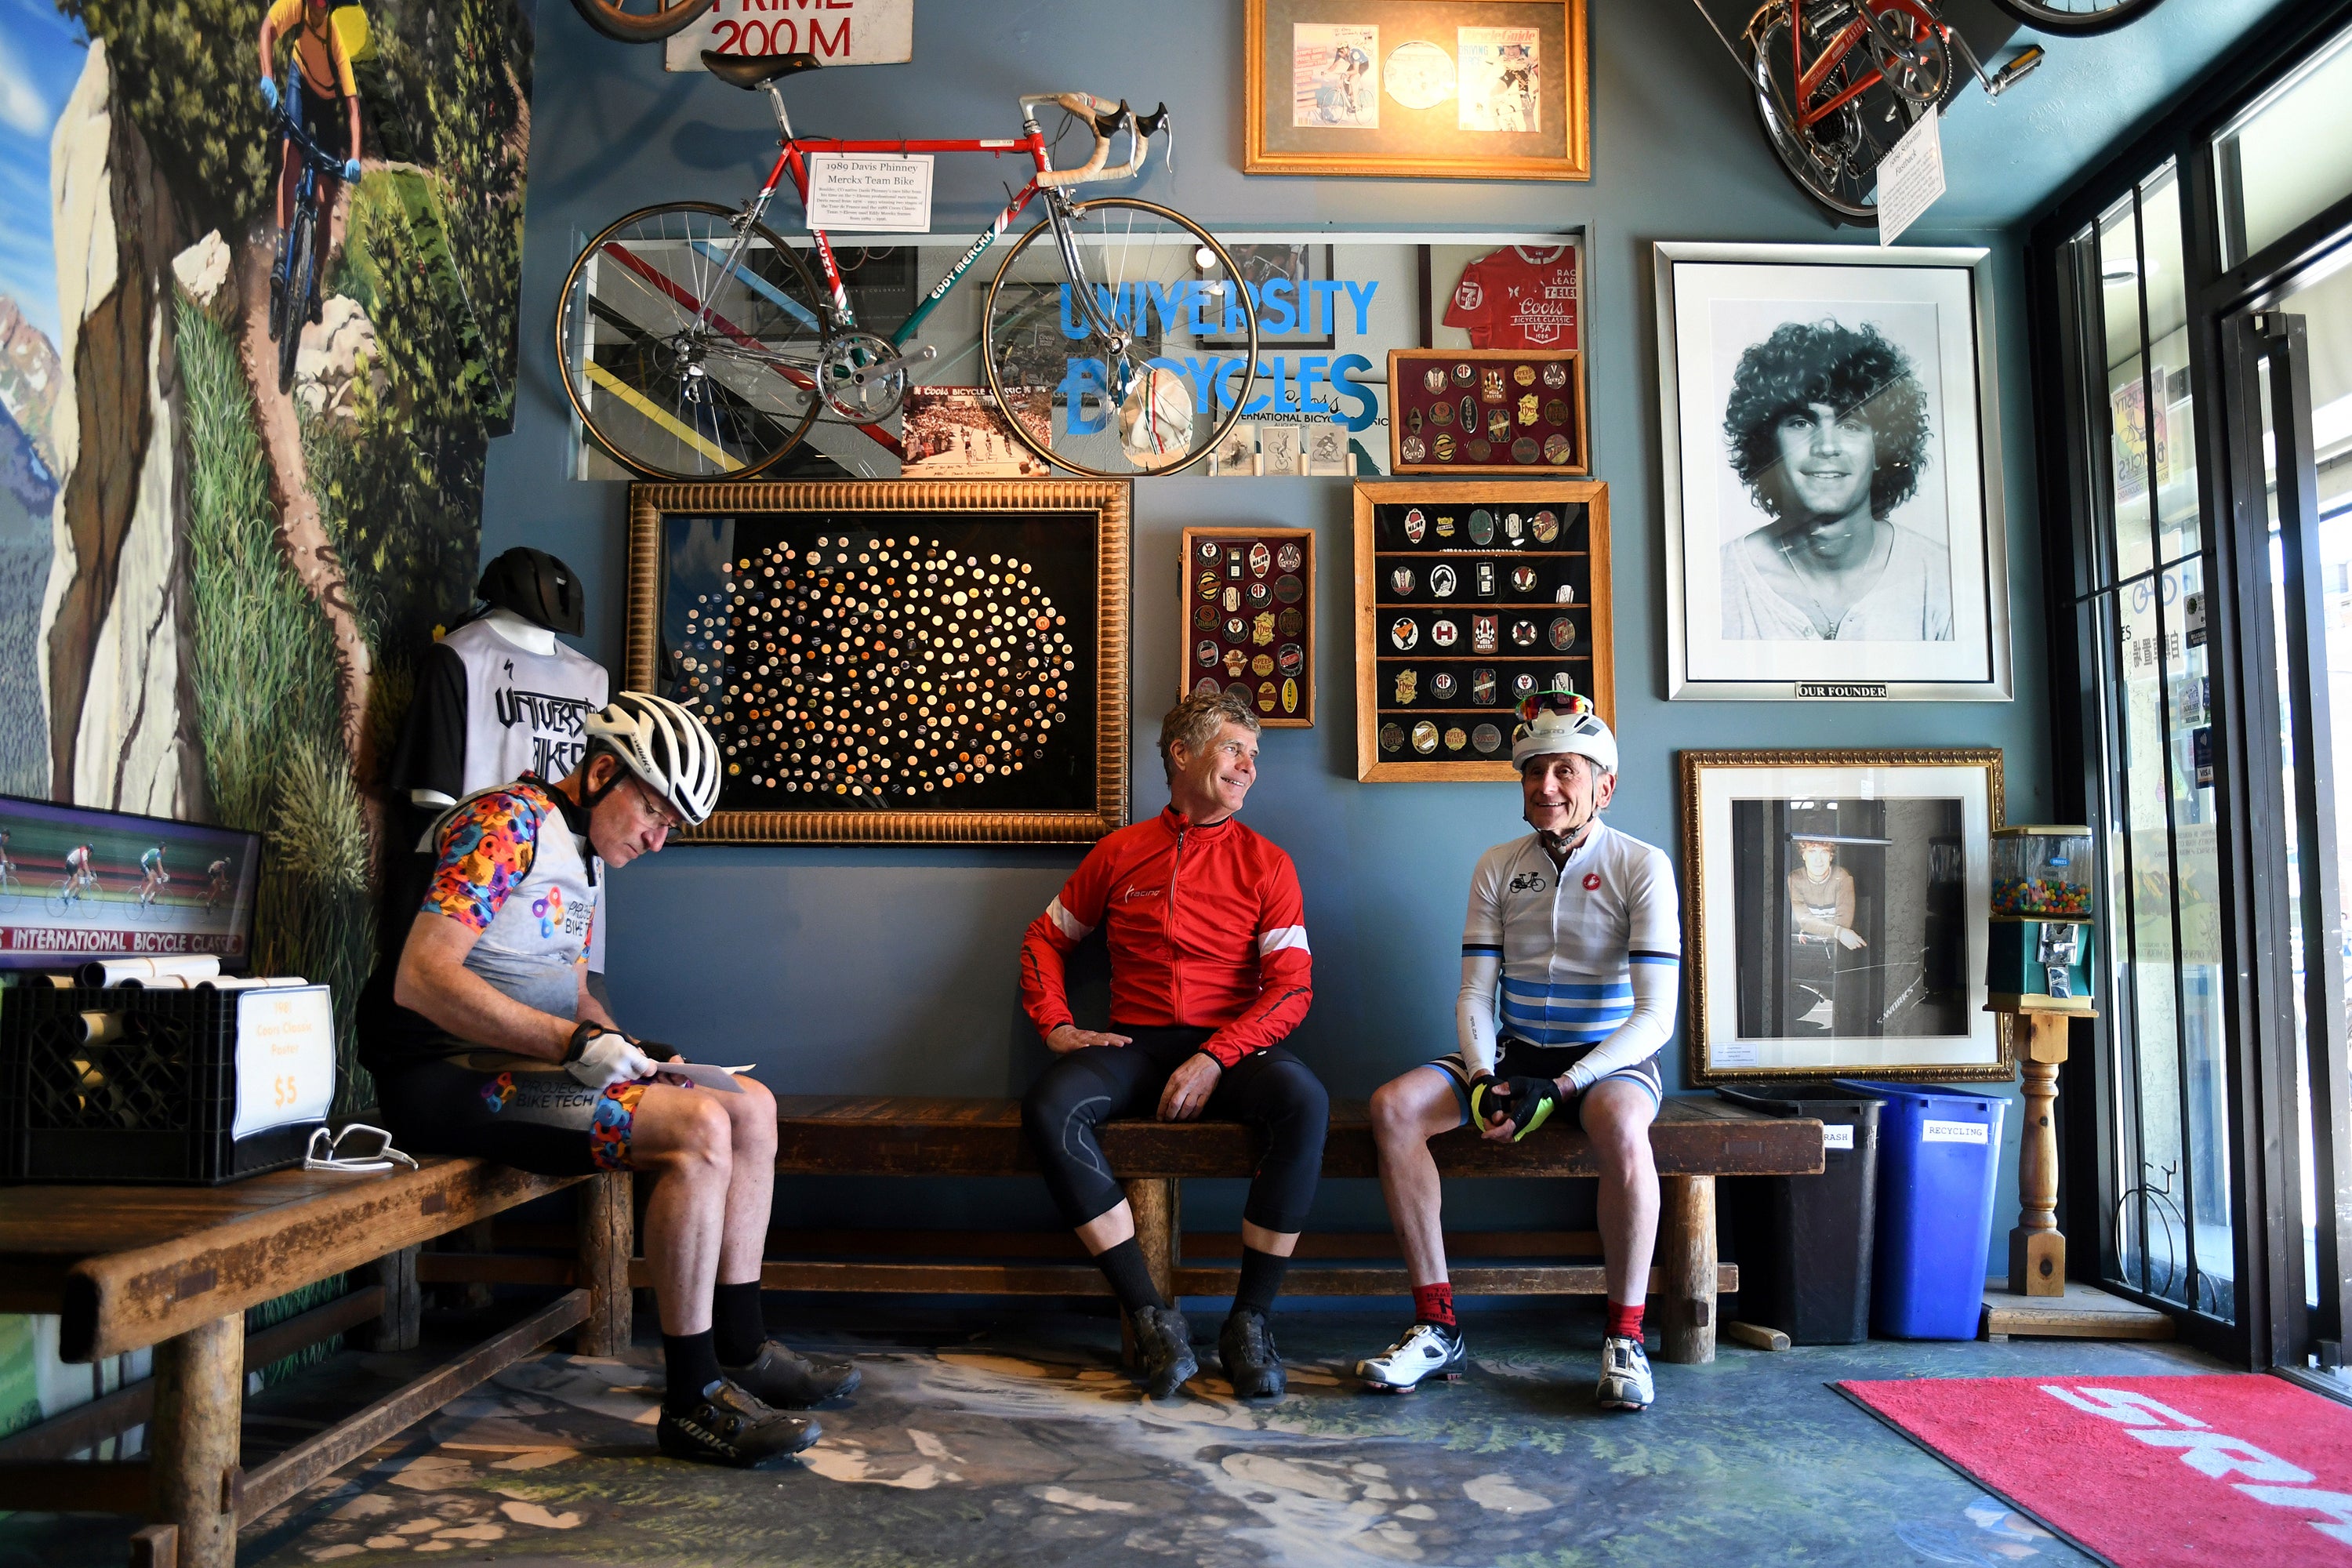 University Bicycles owner Douglas Emerson, center, talks with friends in his shop in Boulder